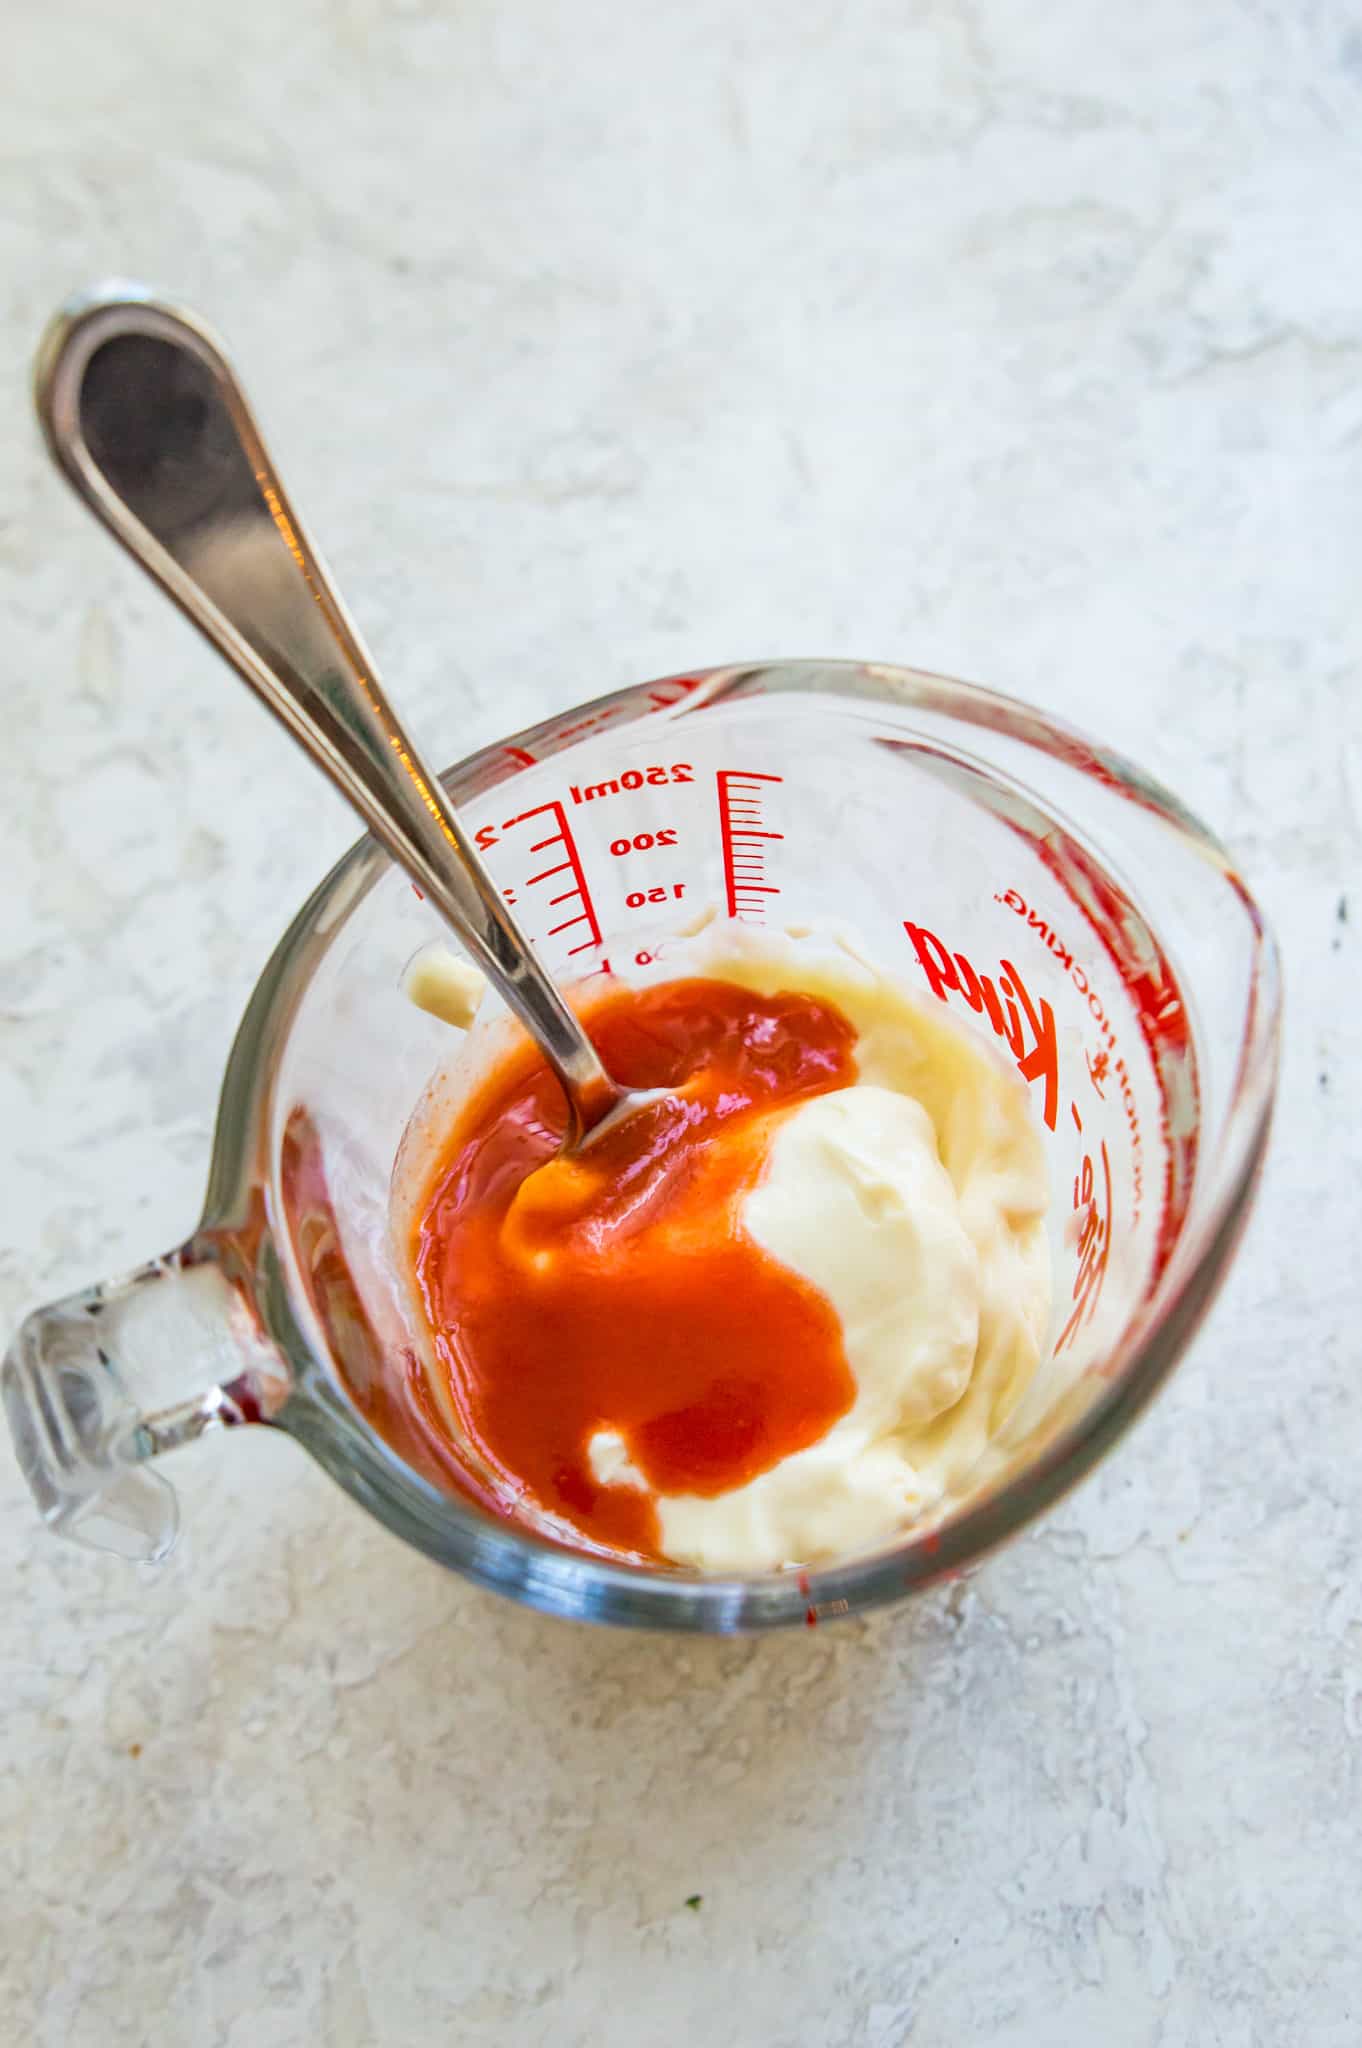 A measuring cup filled with mayonnaise and hot sauce.